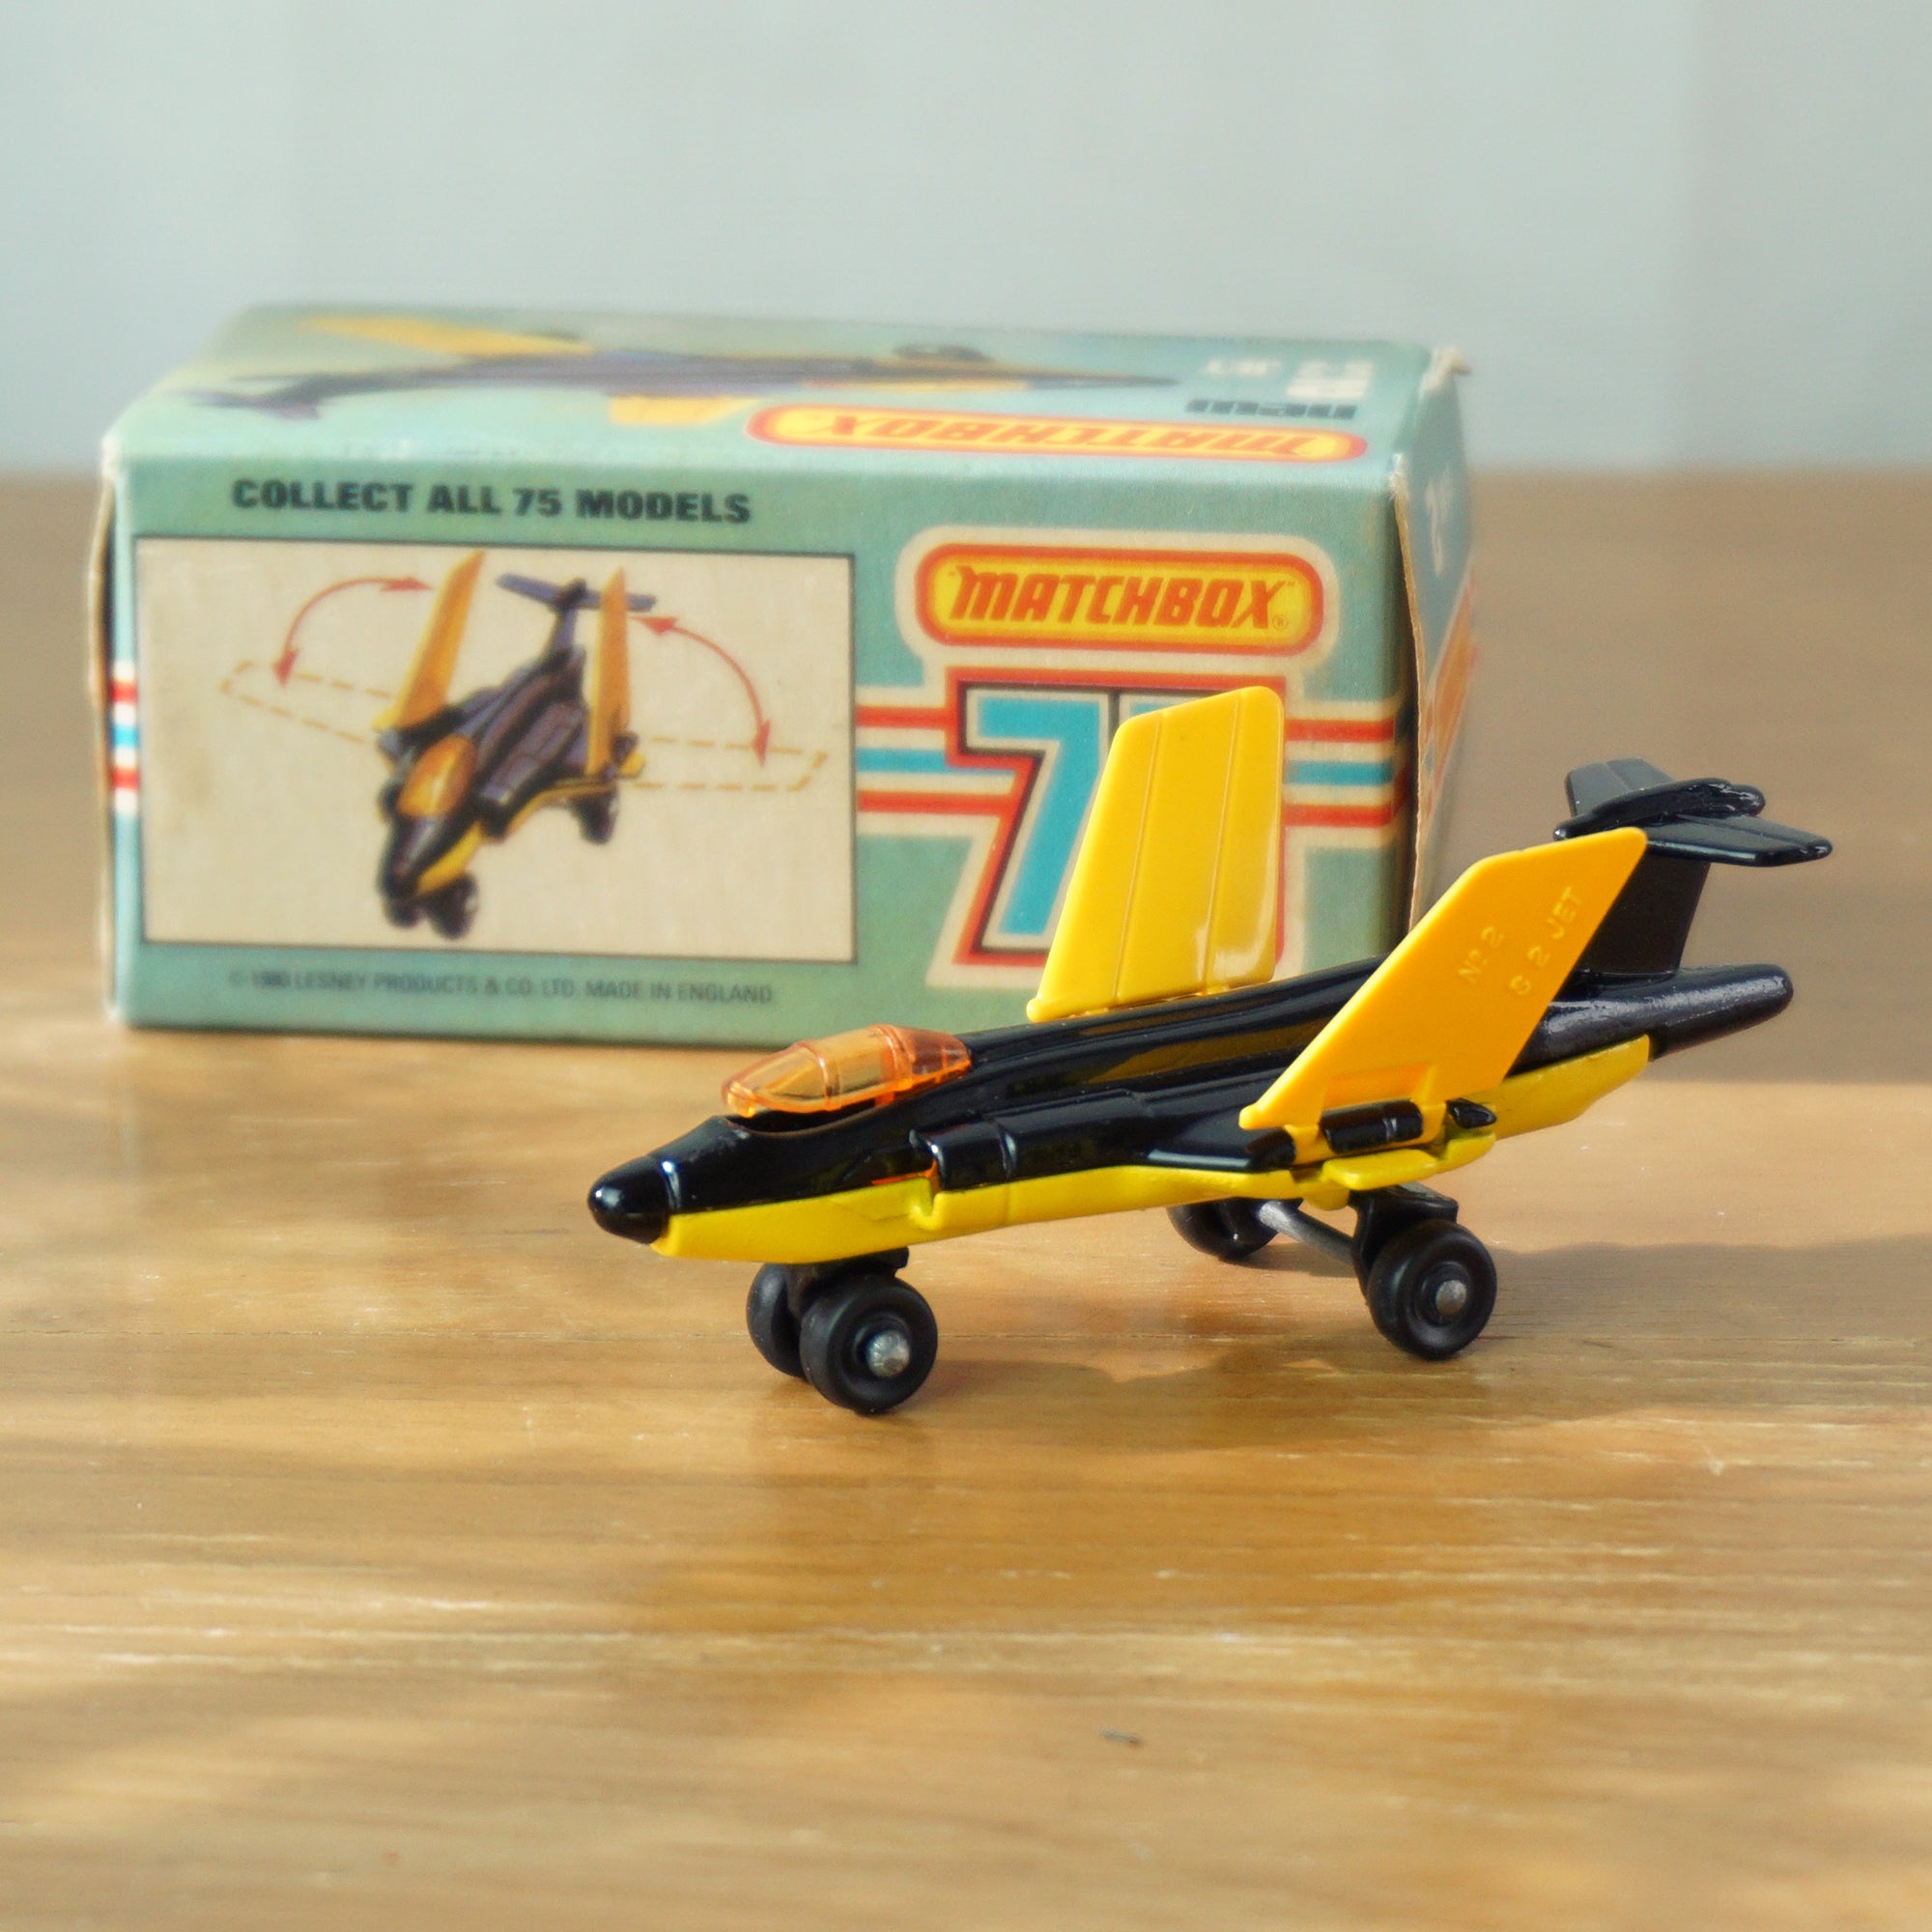 1981 Vintage Diecast MATCHBOX 75 Yellow and Black S-2 Jet 2 Mint in Box. Made in England by Lesney